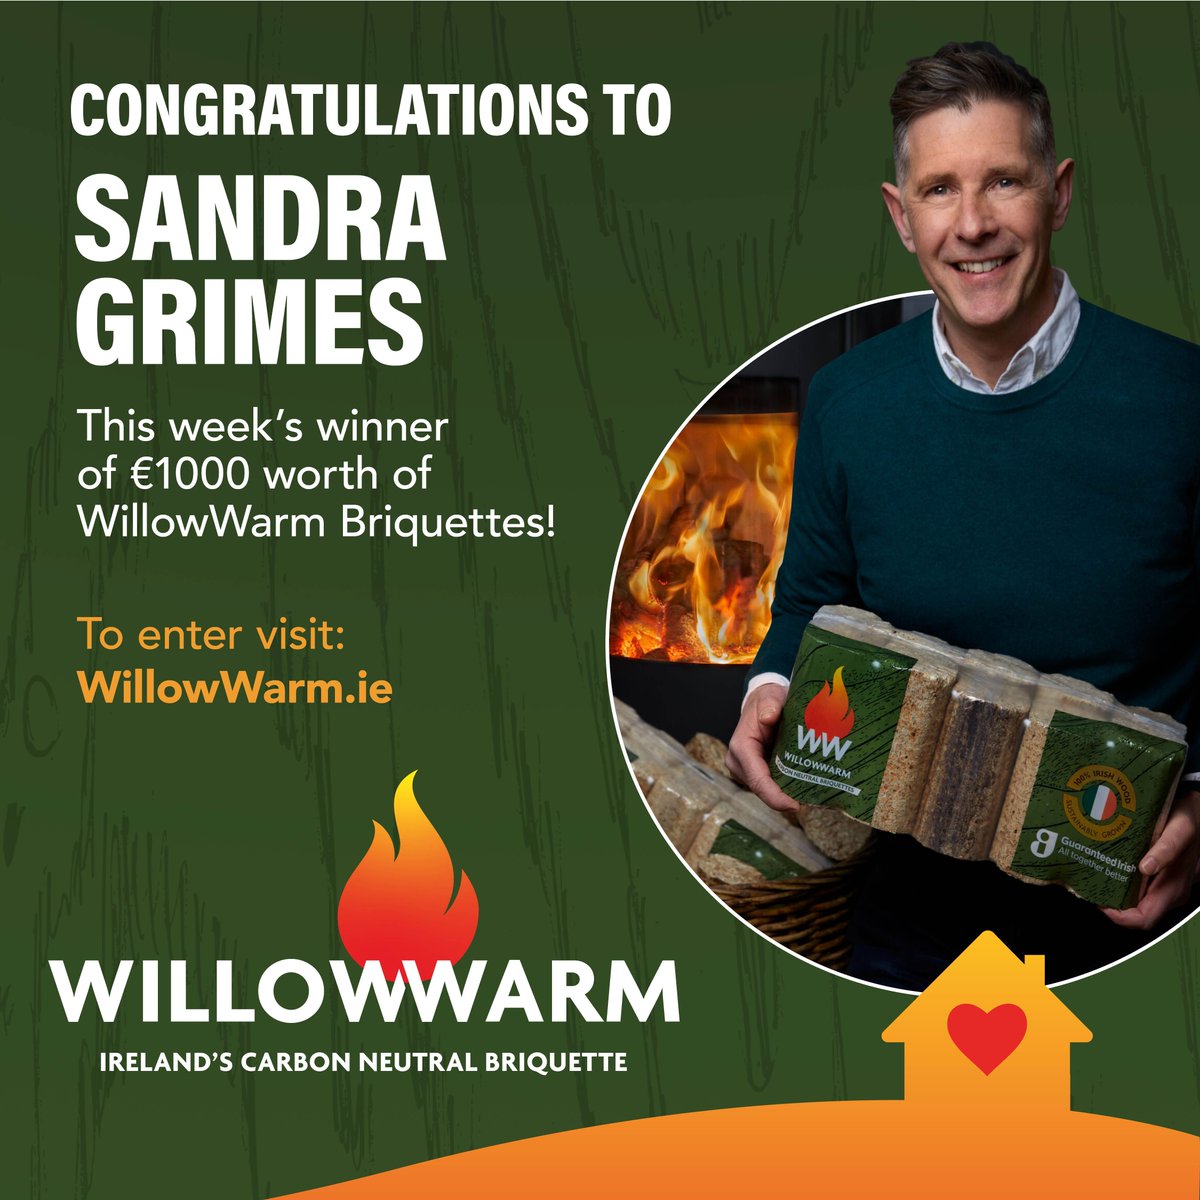 The first winner of €1,000 worth of #WillowWarm #Briquettes is Sandra Grimes.

And don't forget our main competition to win a home consultation with Dermot Bannon. buff.ly/42N5cw6 

#CarbonNeutral #EnvironmentallyFriendly #Sustainability #GuaranteedIrish #EPAregistered